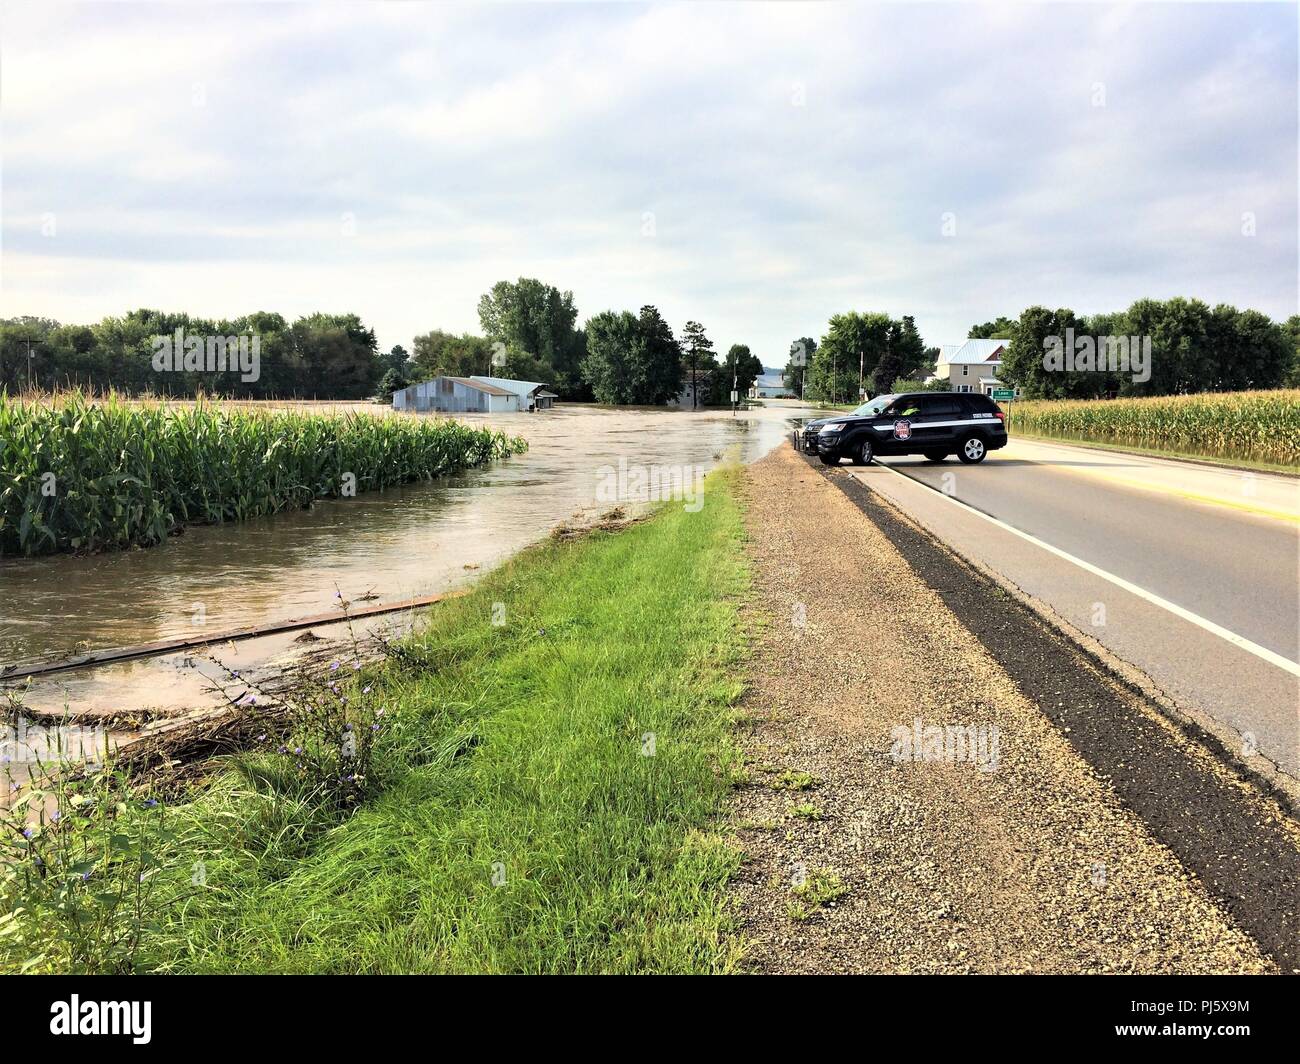 An area of Leon, Wis., shows flooding Aug, 28, 2018 in Monroe County, Wis. Firefighters with the Directorate of Emergency Services Fire Department at Fort McCoy, Wis., helped with rescue operations for the flooding. On Aug. 27 to early Aug. 28, 2018, 5-12 inches of rain fell on several areas of Monroe County, causing flash flooding and stranding residents in flooded areas. Fort McCoy firefighters helped with the rescue of people in the affected areas. (U.S. Army Photo by Scott T. Sturkol, Public Affairs Office, Fort McCoy, Wis.) Stock Photo